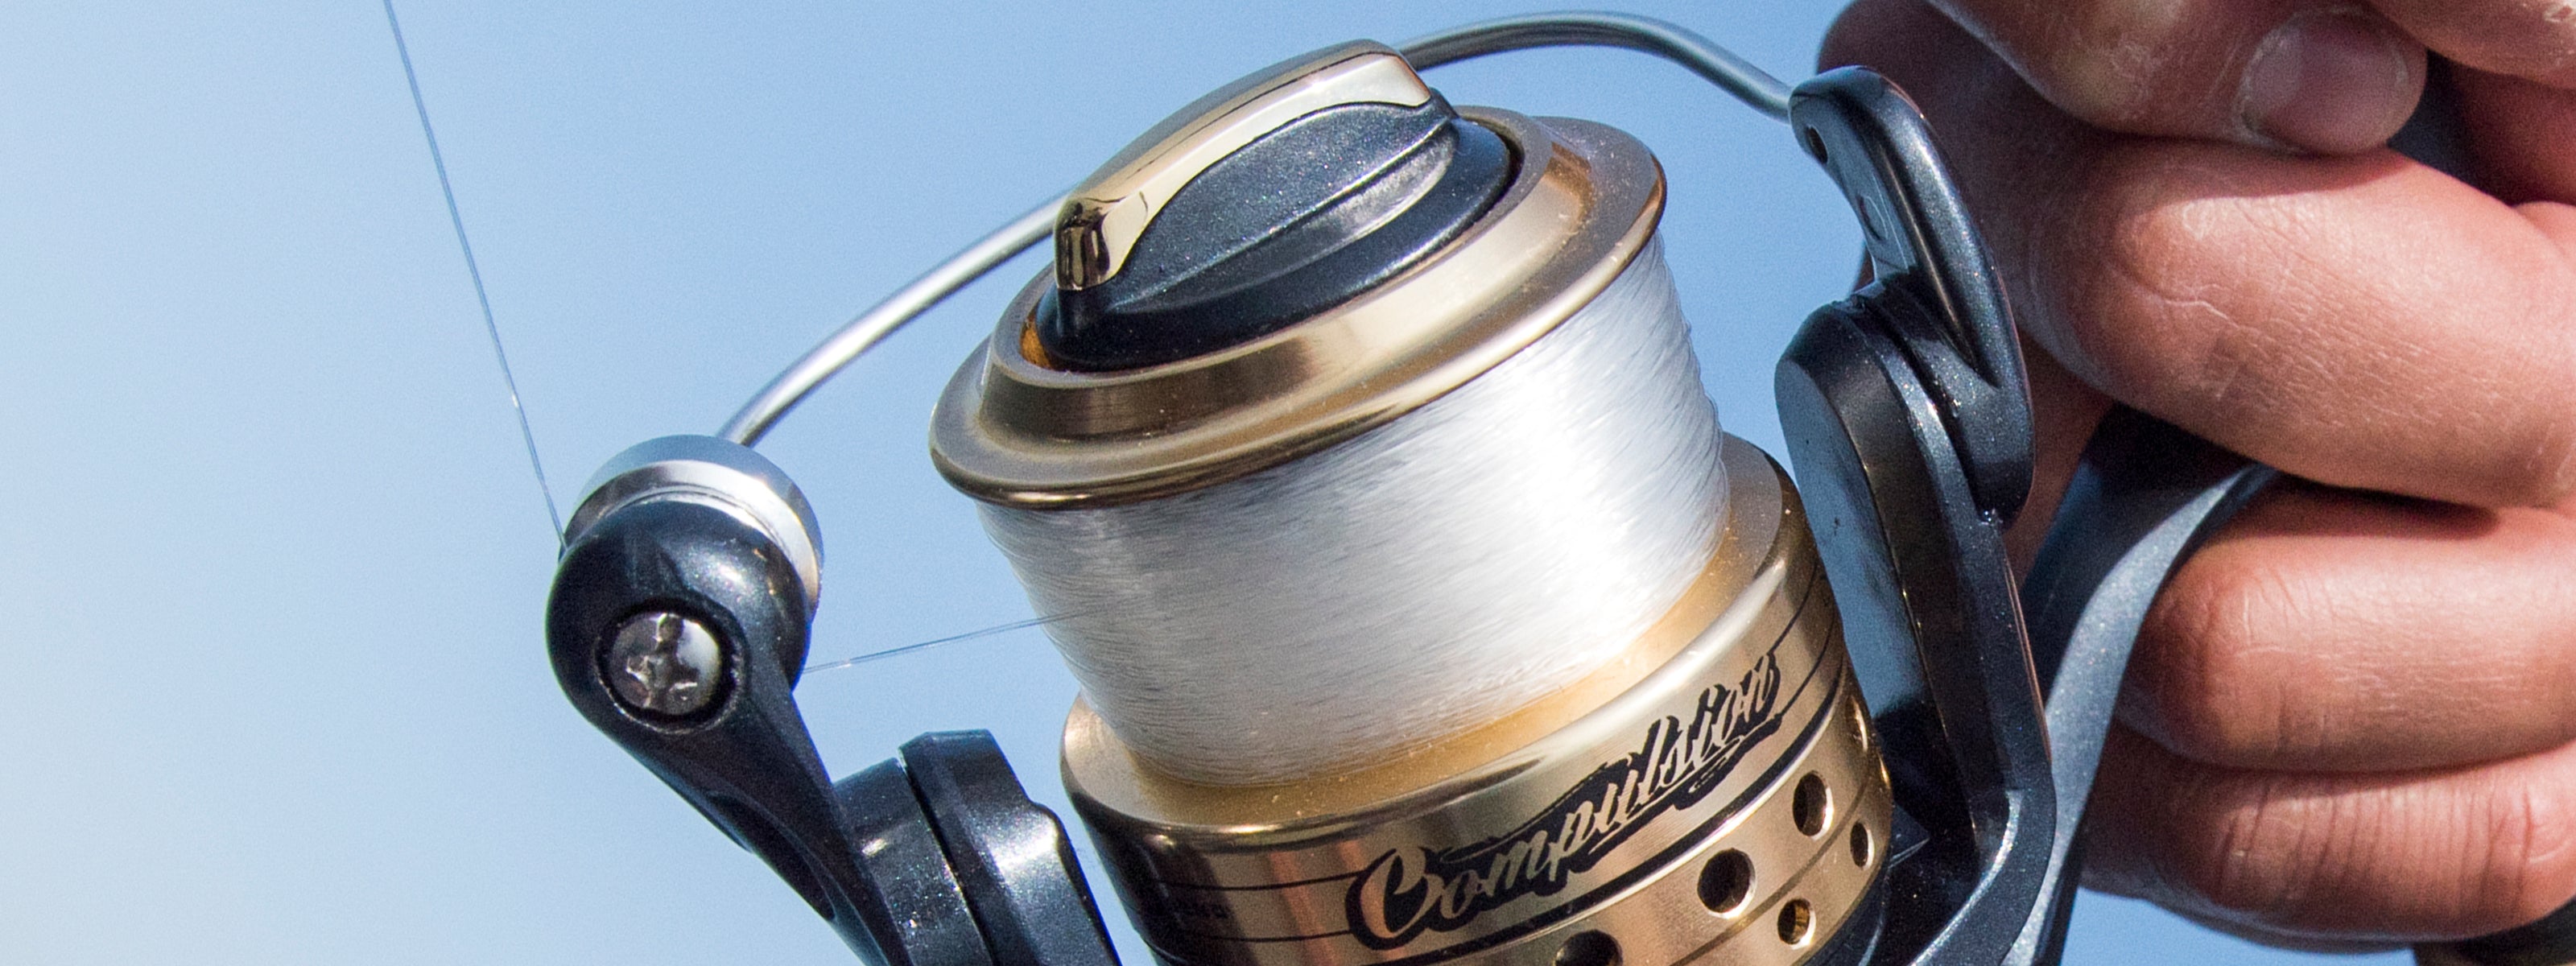 South Bend Fishing Line & Leader